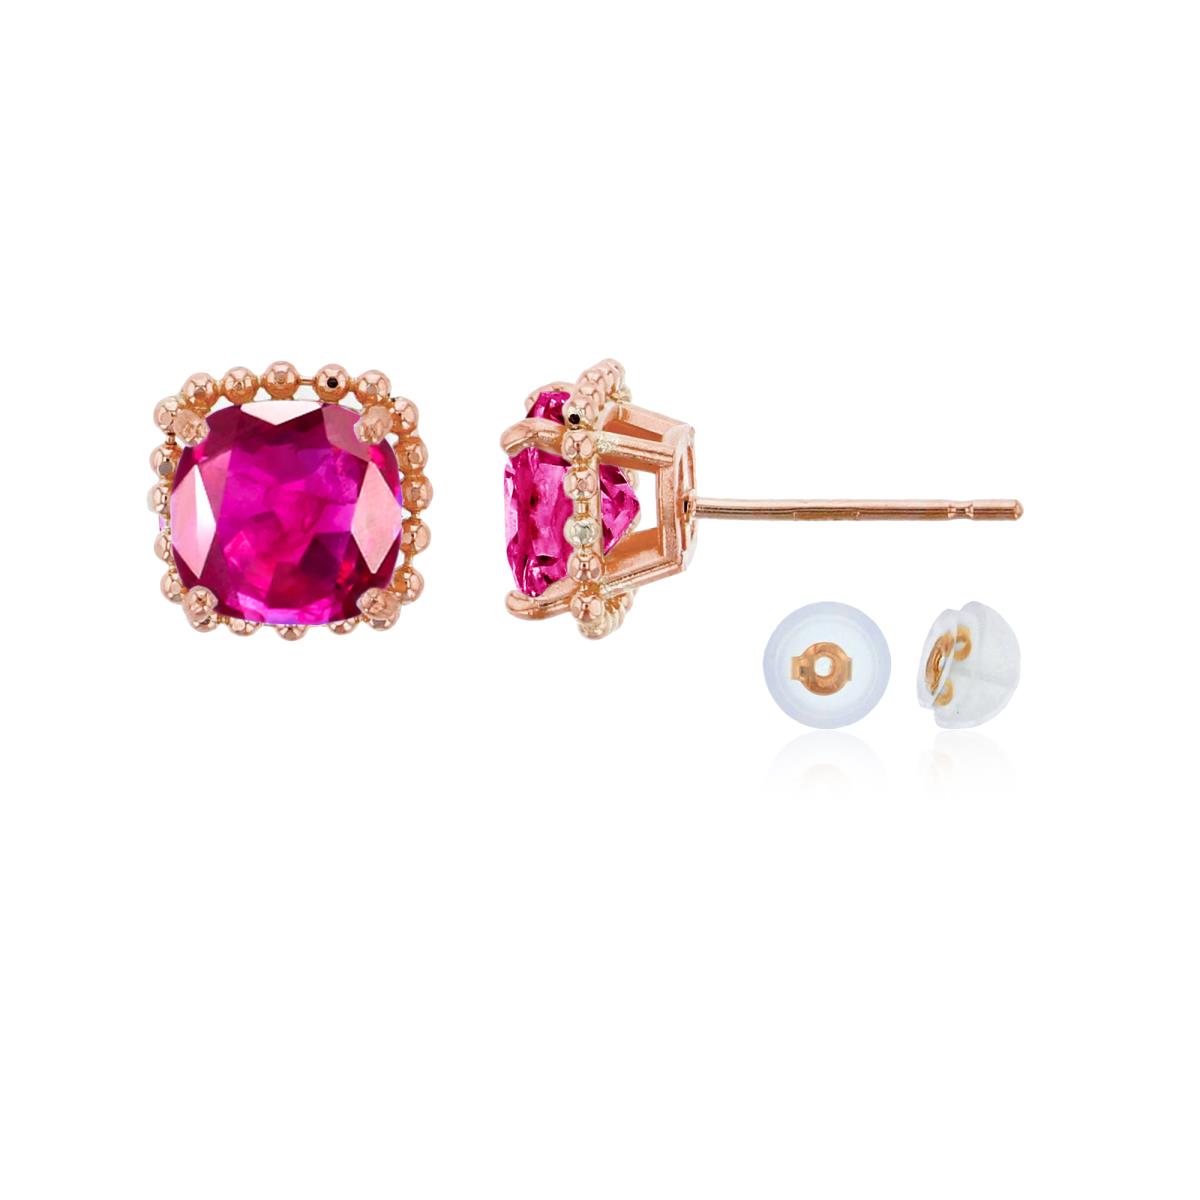 10K Rose Gold 6x6mm Cushion Cut Created Ruby Bead Frame Stud Earring with Silicone Back